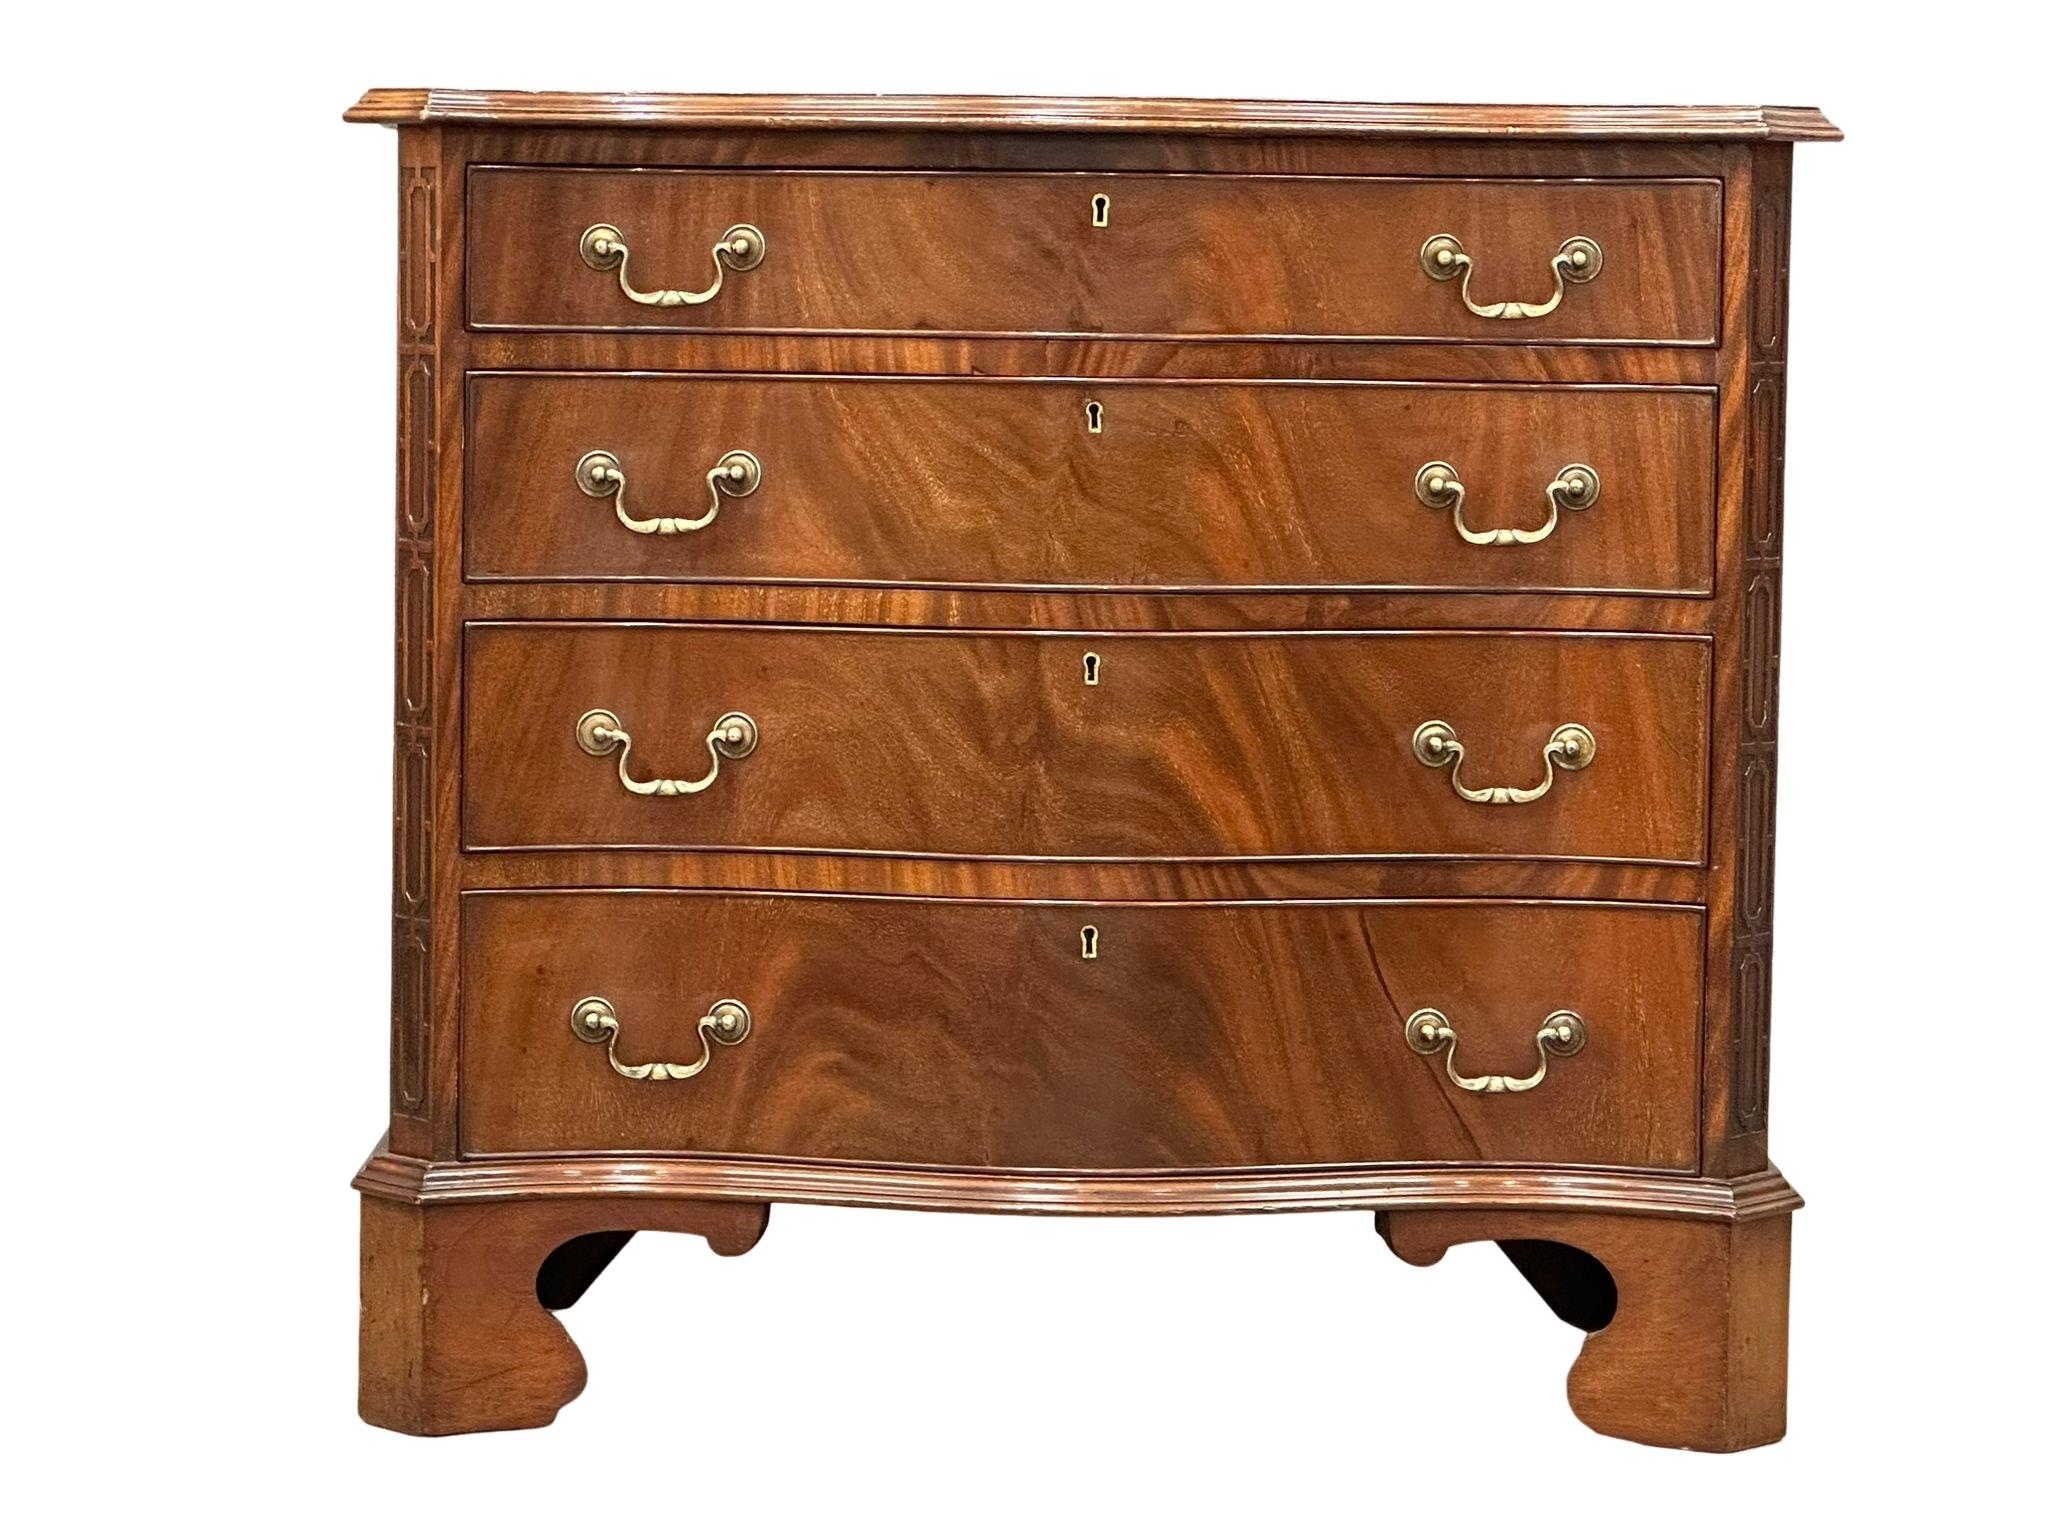 A good quality late 19th century Chippendale Revival mahogany serpentine front chest of drawers. - Image 11 of 22